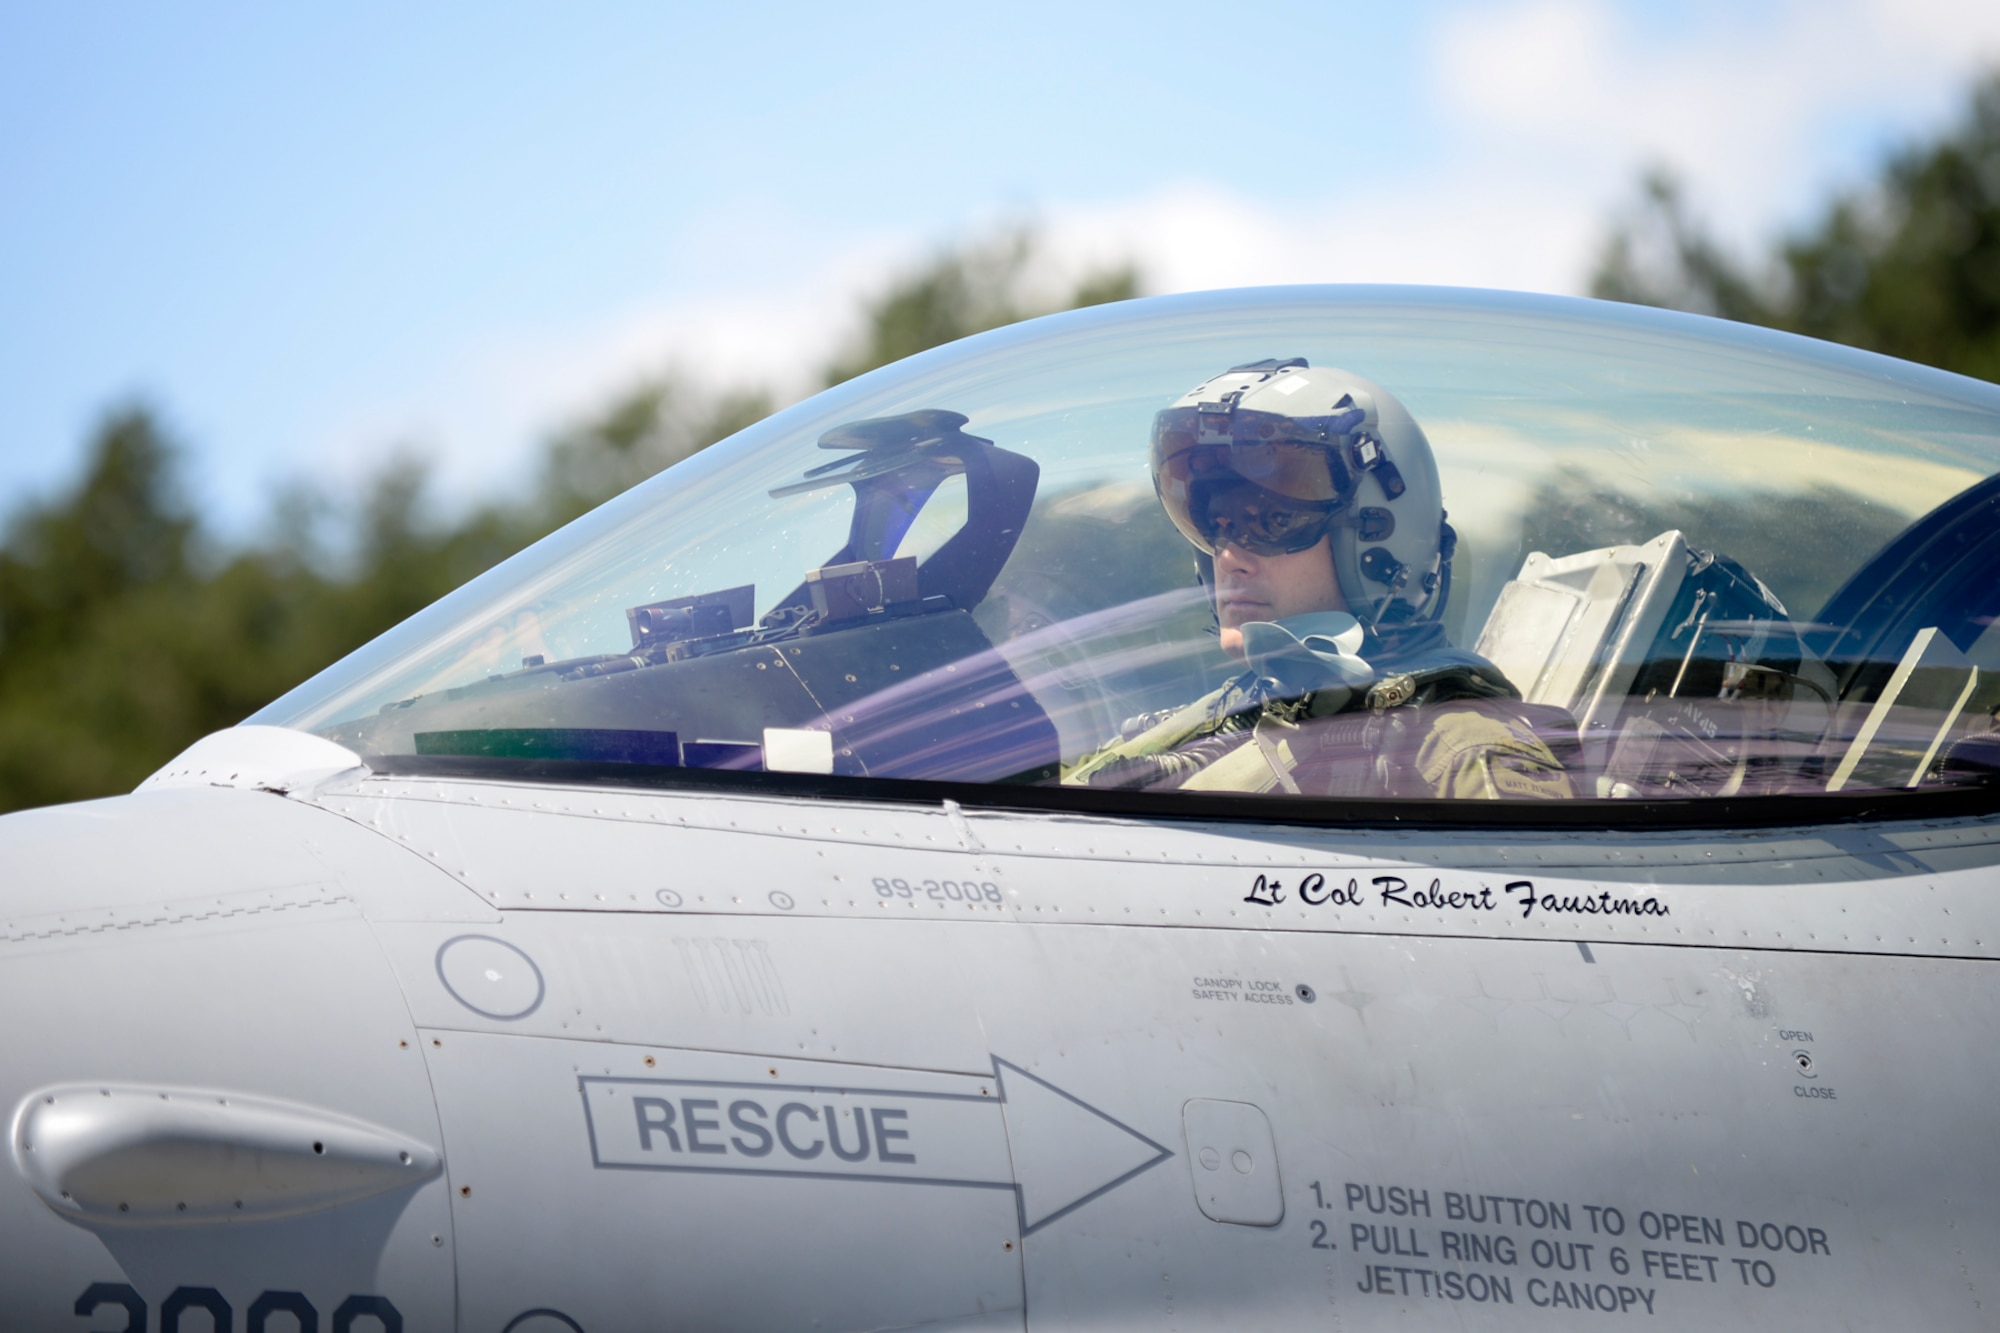 An F-16 Fighting Falcon pilot from the 31st Fighter Wing, Aviano Air Base, Italy, prepares for take-off during Aviation Detachment Rotation 16-3 at Lask Air Base, Poland, June 7, 2016. While in Poland as part of regular quarterly training for AvDet Rotation 16-3, the participating units will also support exercises Baltic Operations 2016, Saber Strike 2016, Swift Response 2016 and Anakonda 2016, which will be occurring concurrently. (U.S. Air Force photo/Senior Airman Erin Babis)